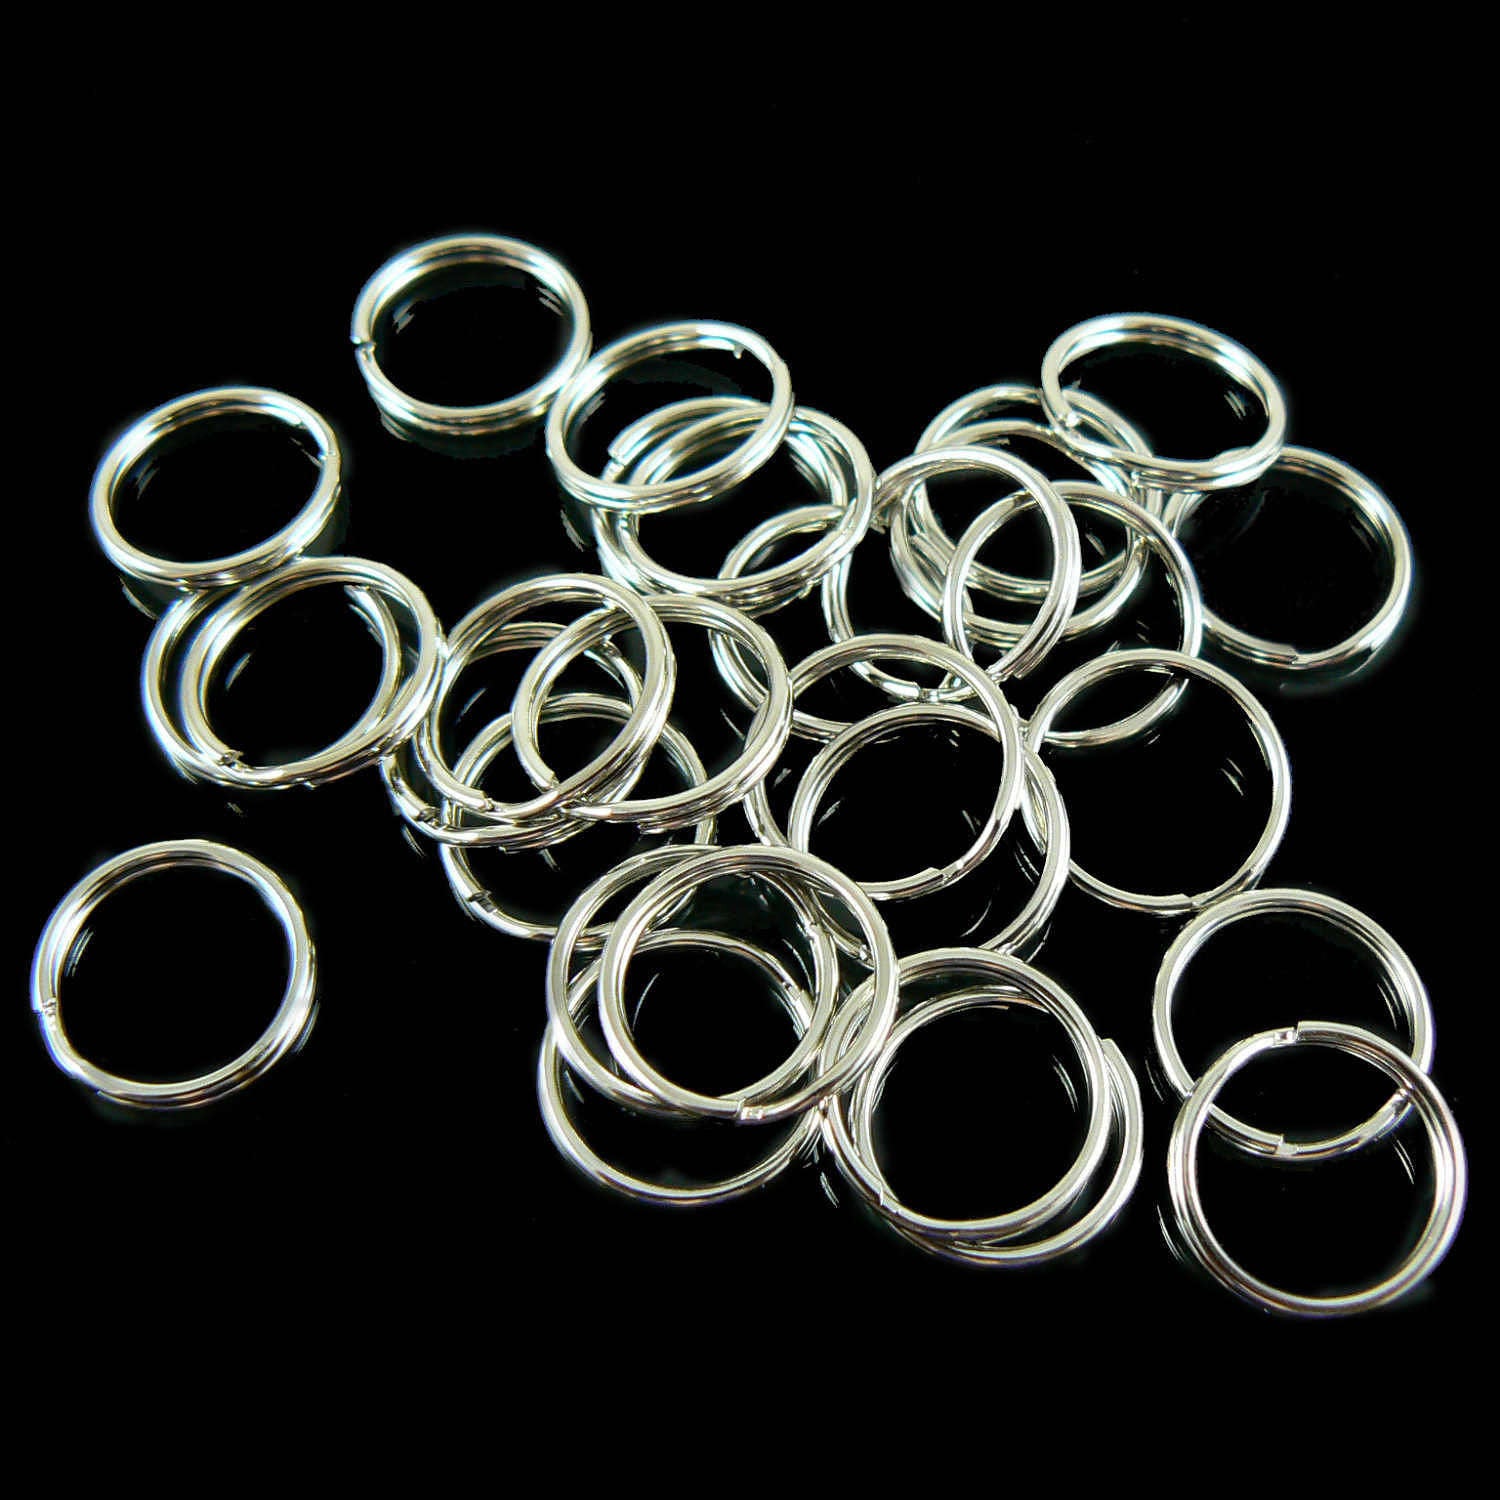 12mm nickel plated split ring/ key ring/ key chain rings, 50 or 100 pc – My  Supplies Source